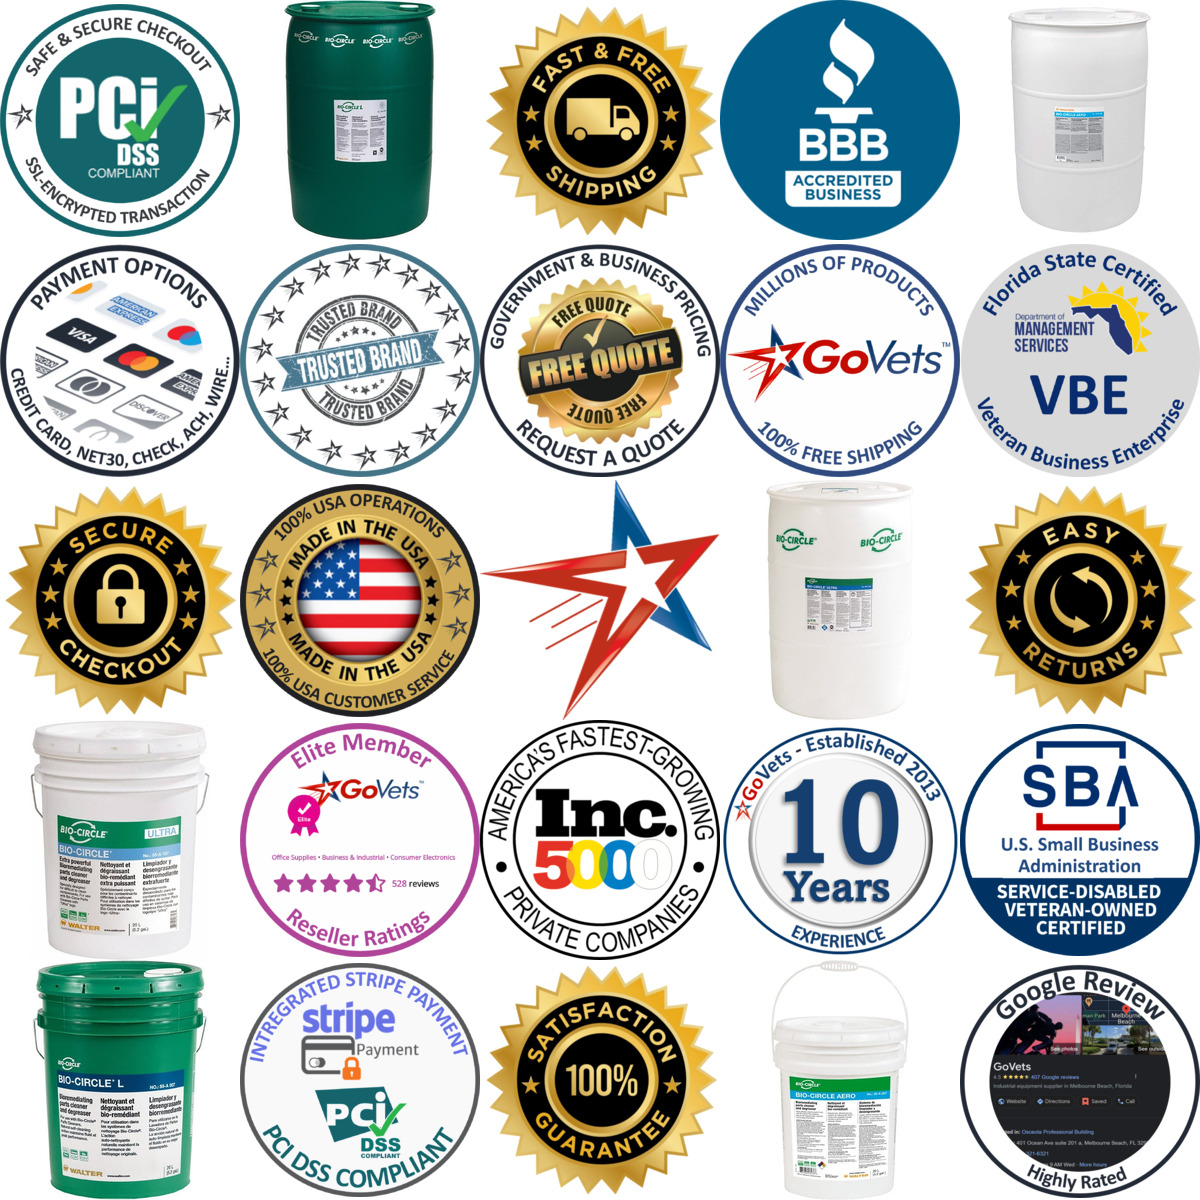 A selection of Bio Circle products on GoVets